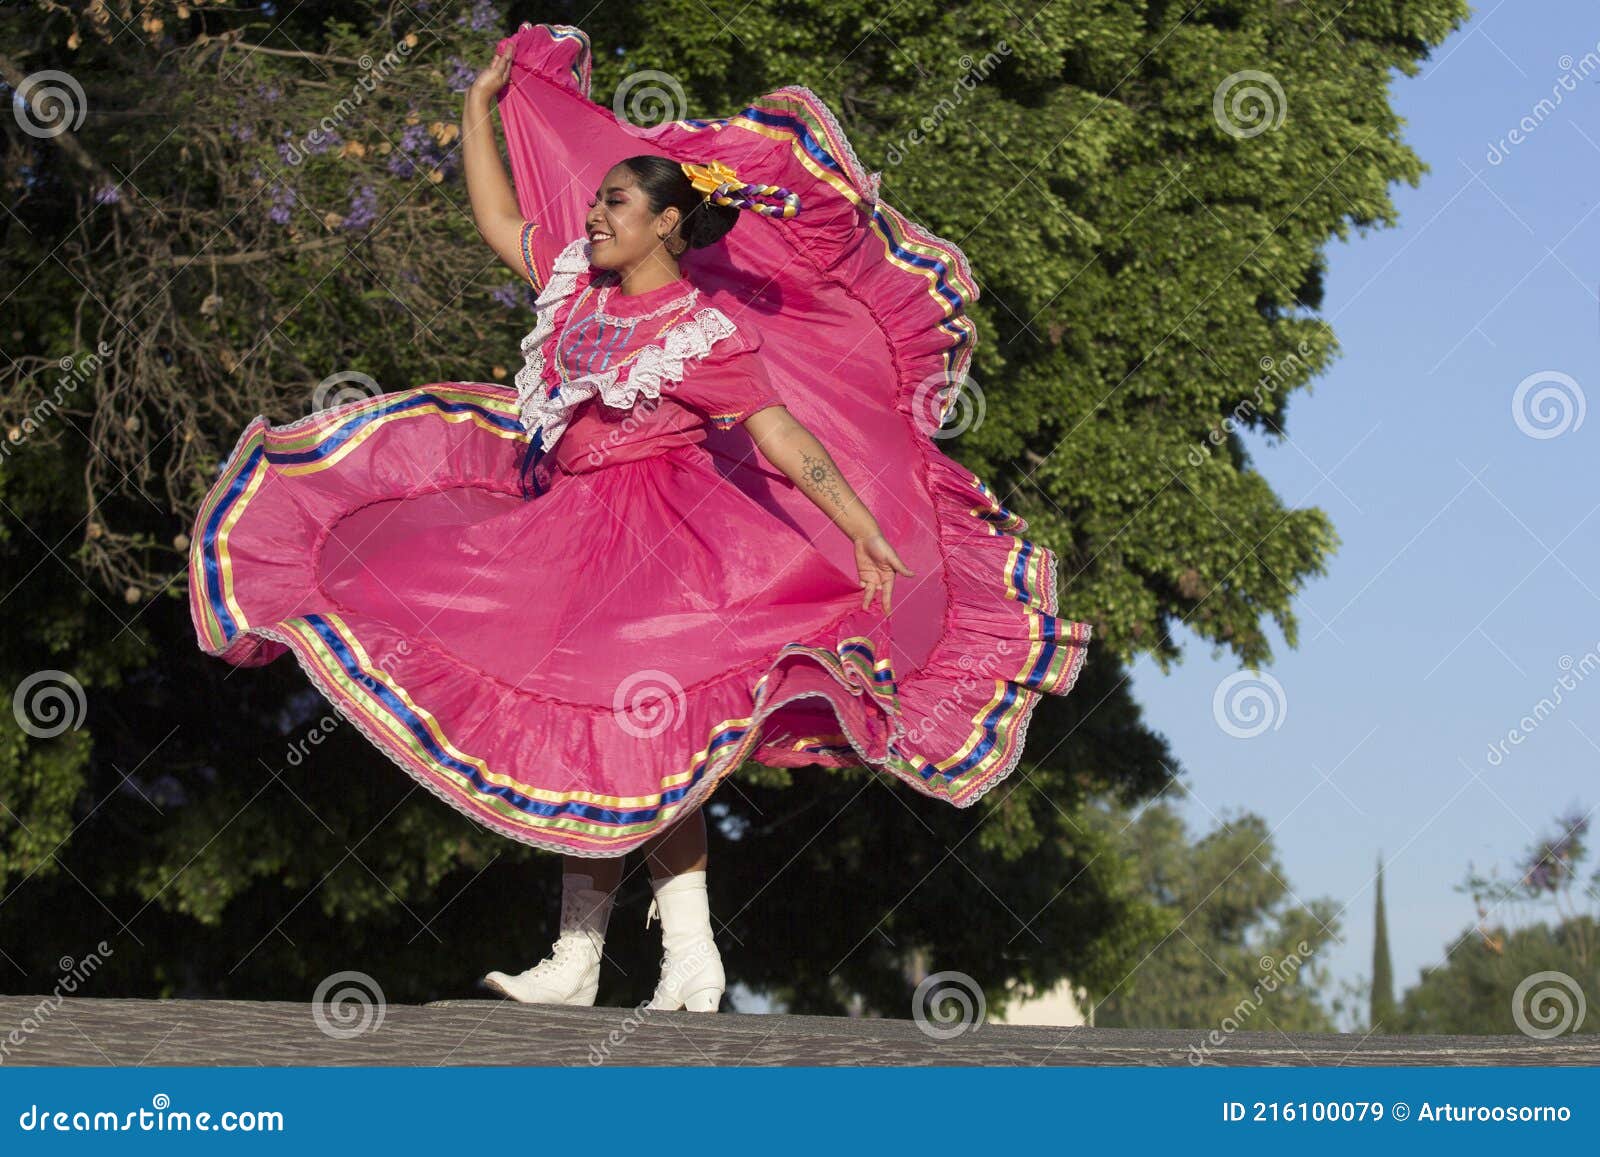 a young mexican woman folk dancer with traditional costume